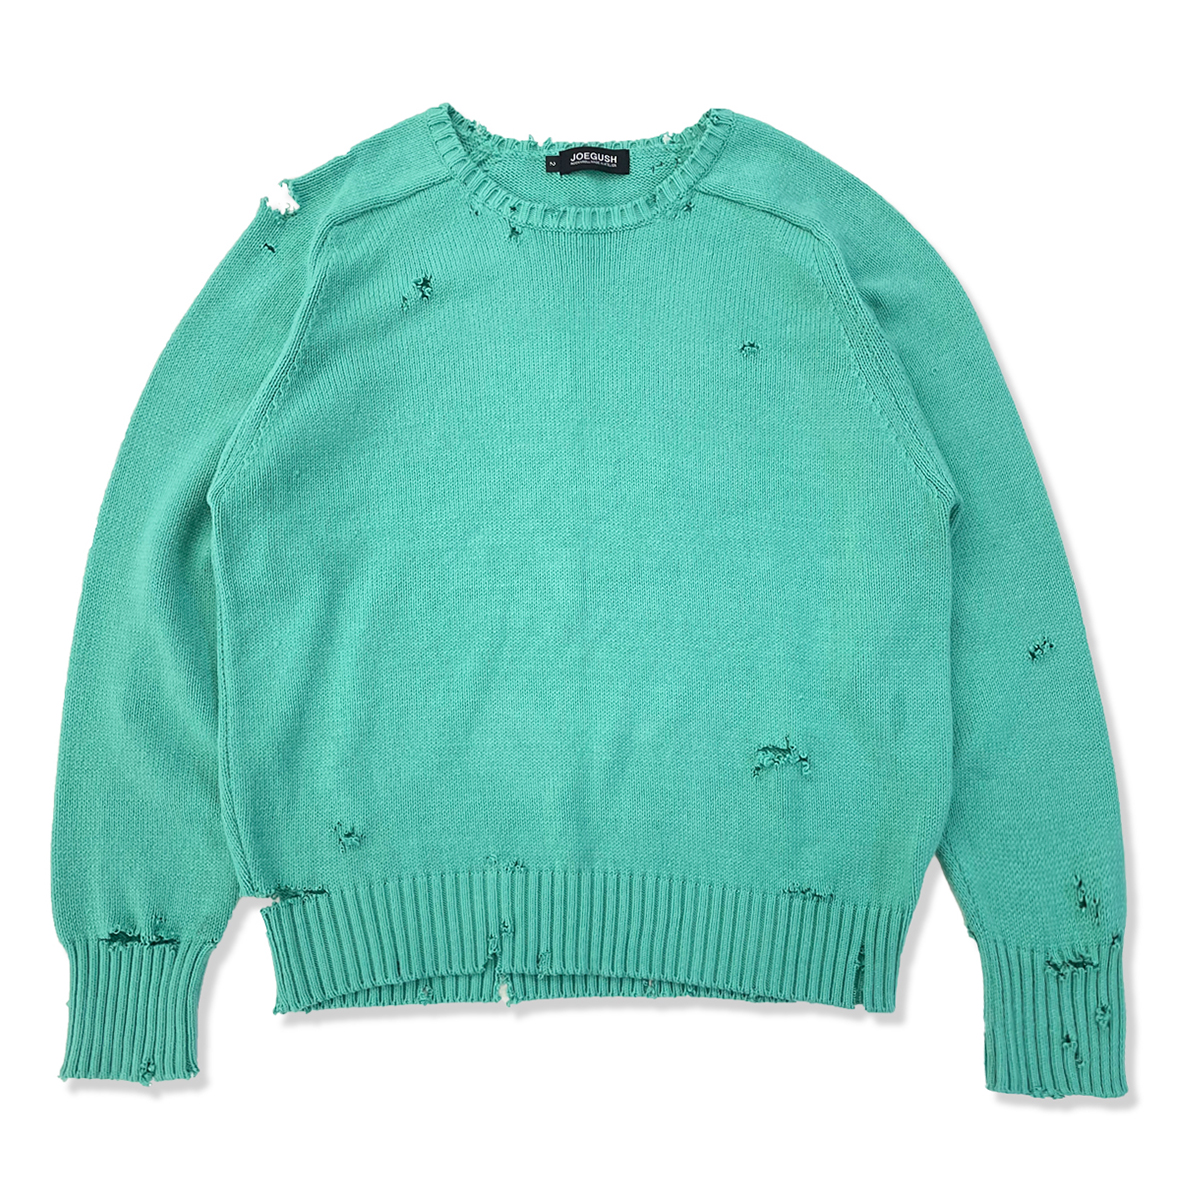 Single pullover knit Lv.2 (Distressed Ver.) (Mint)